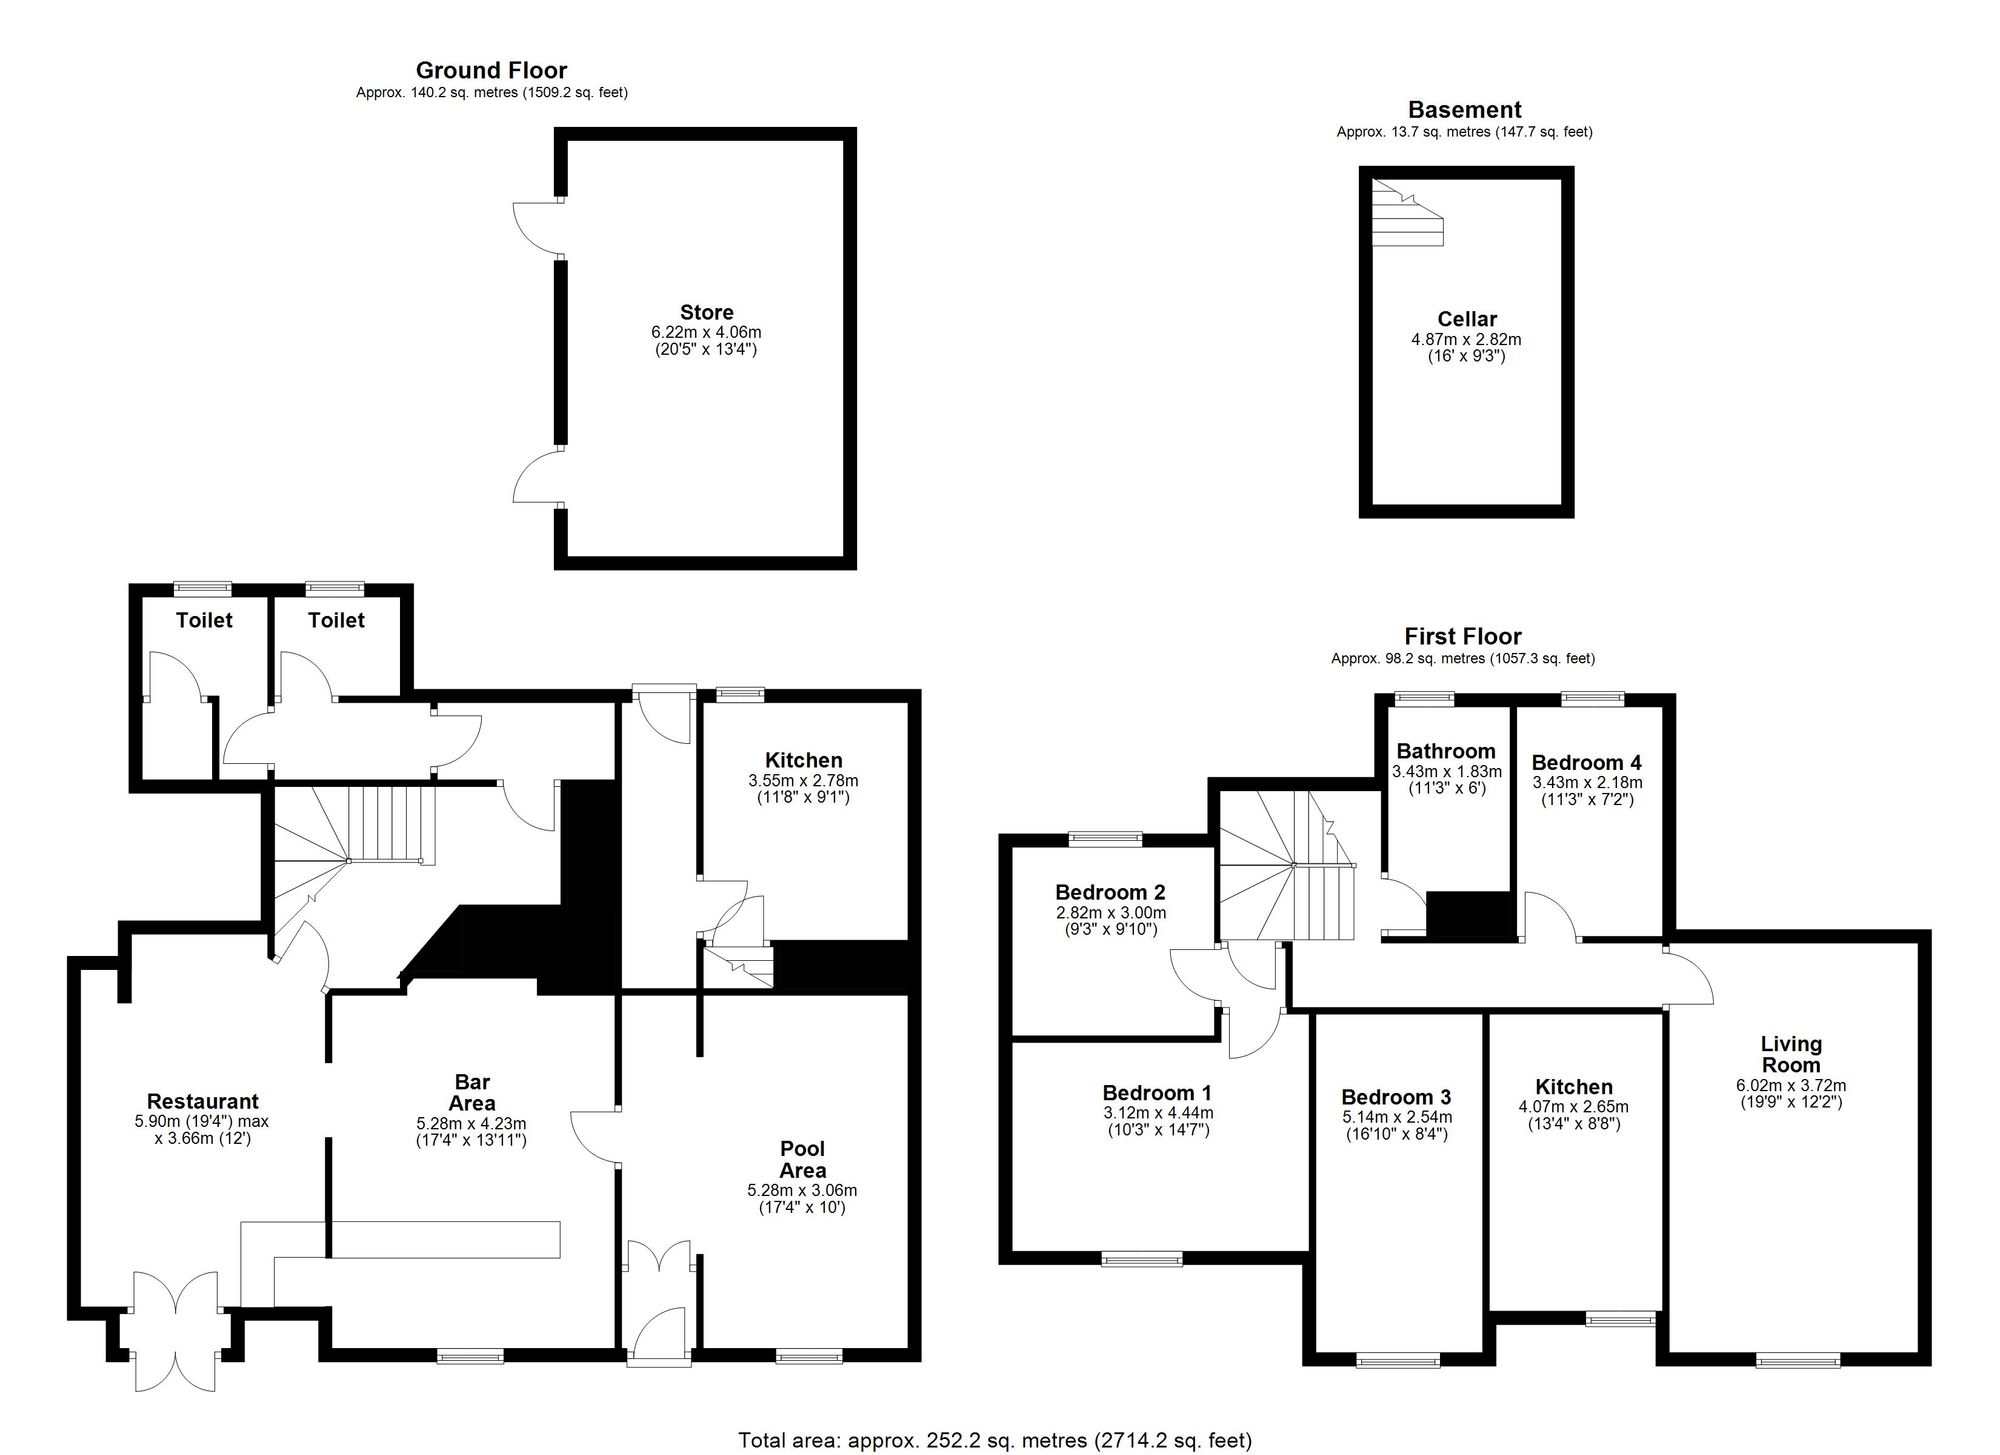 For sale in Bow, Crediton - Property floorplan